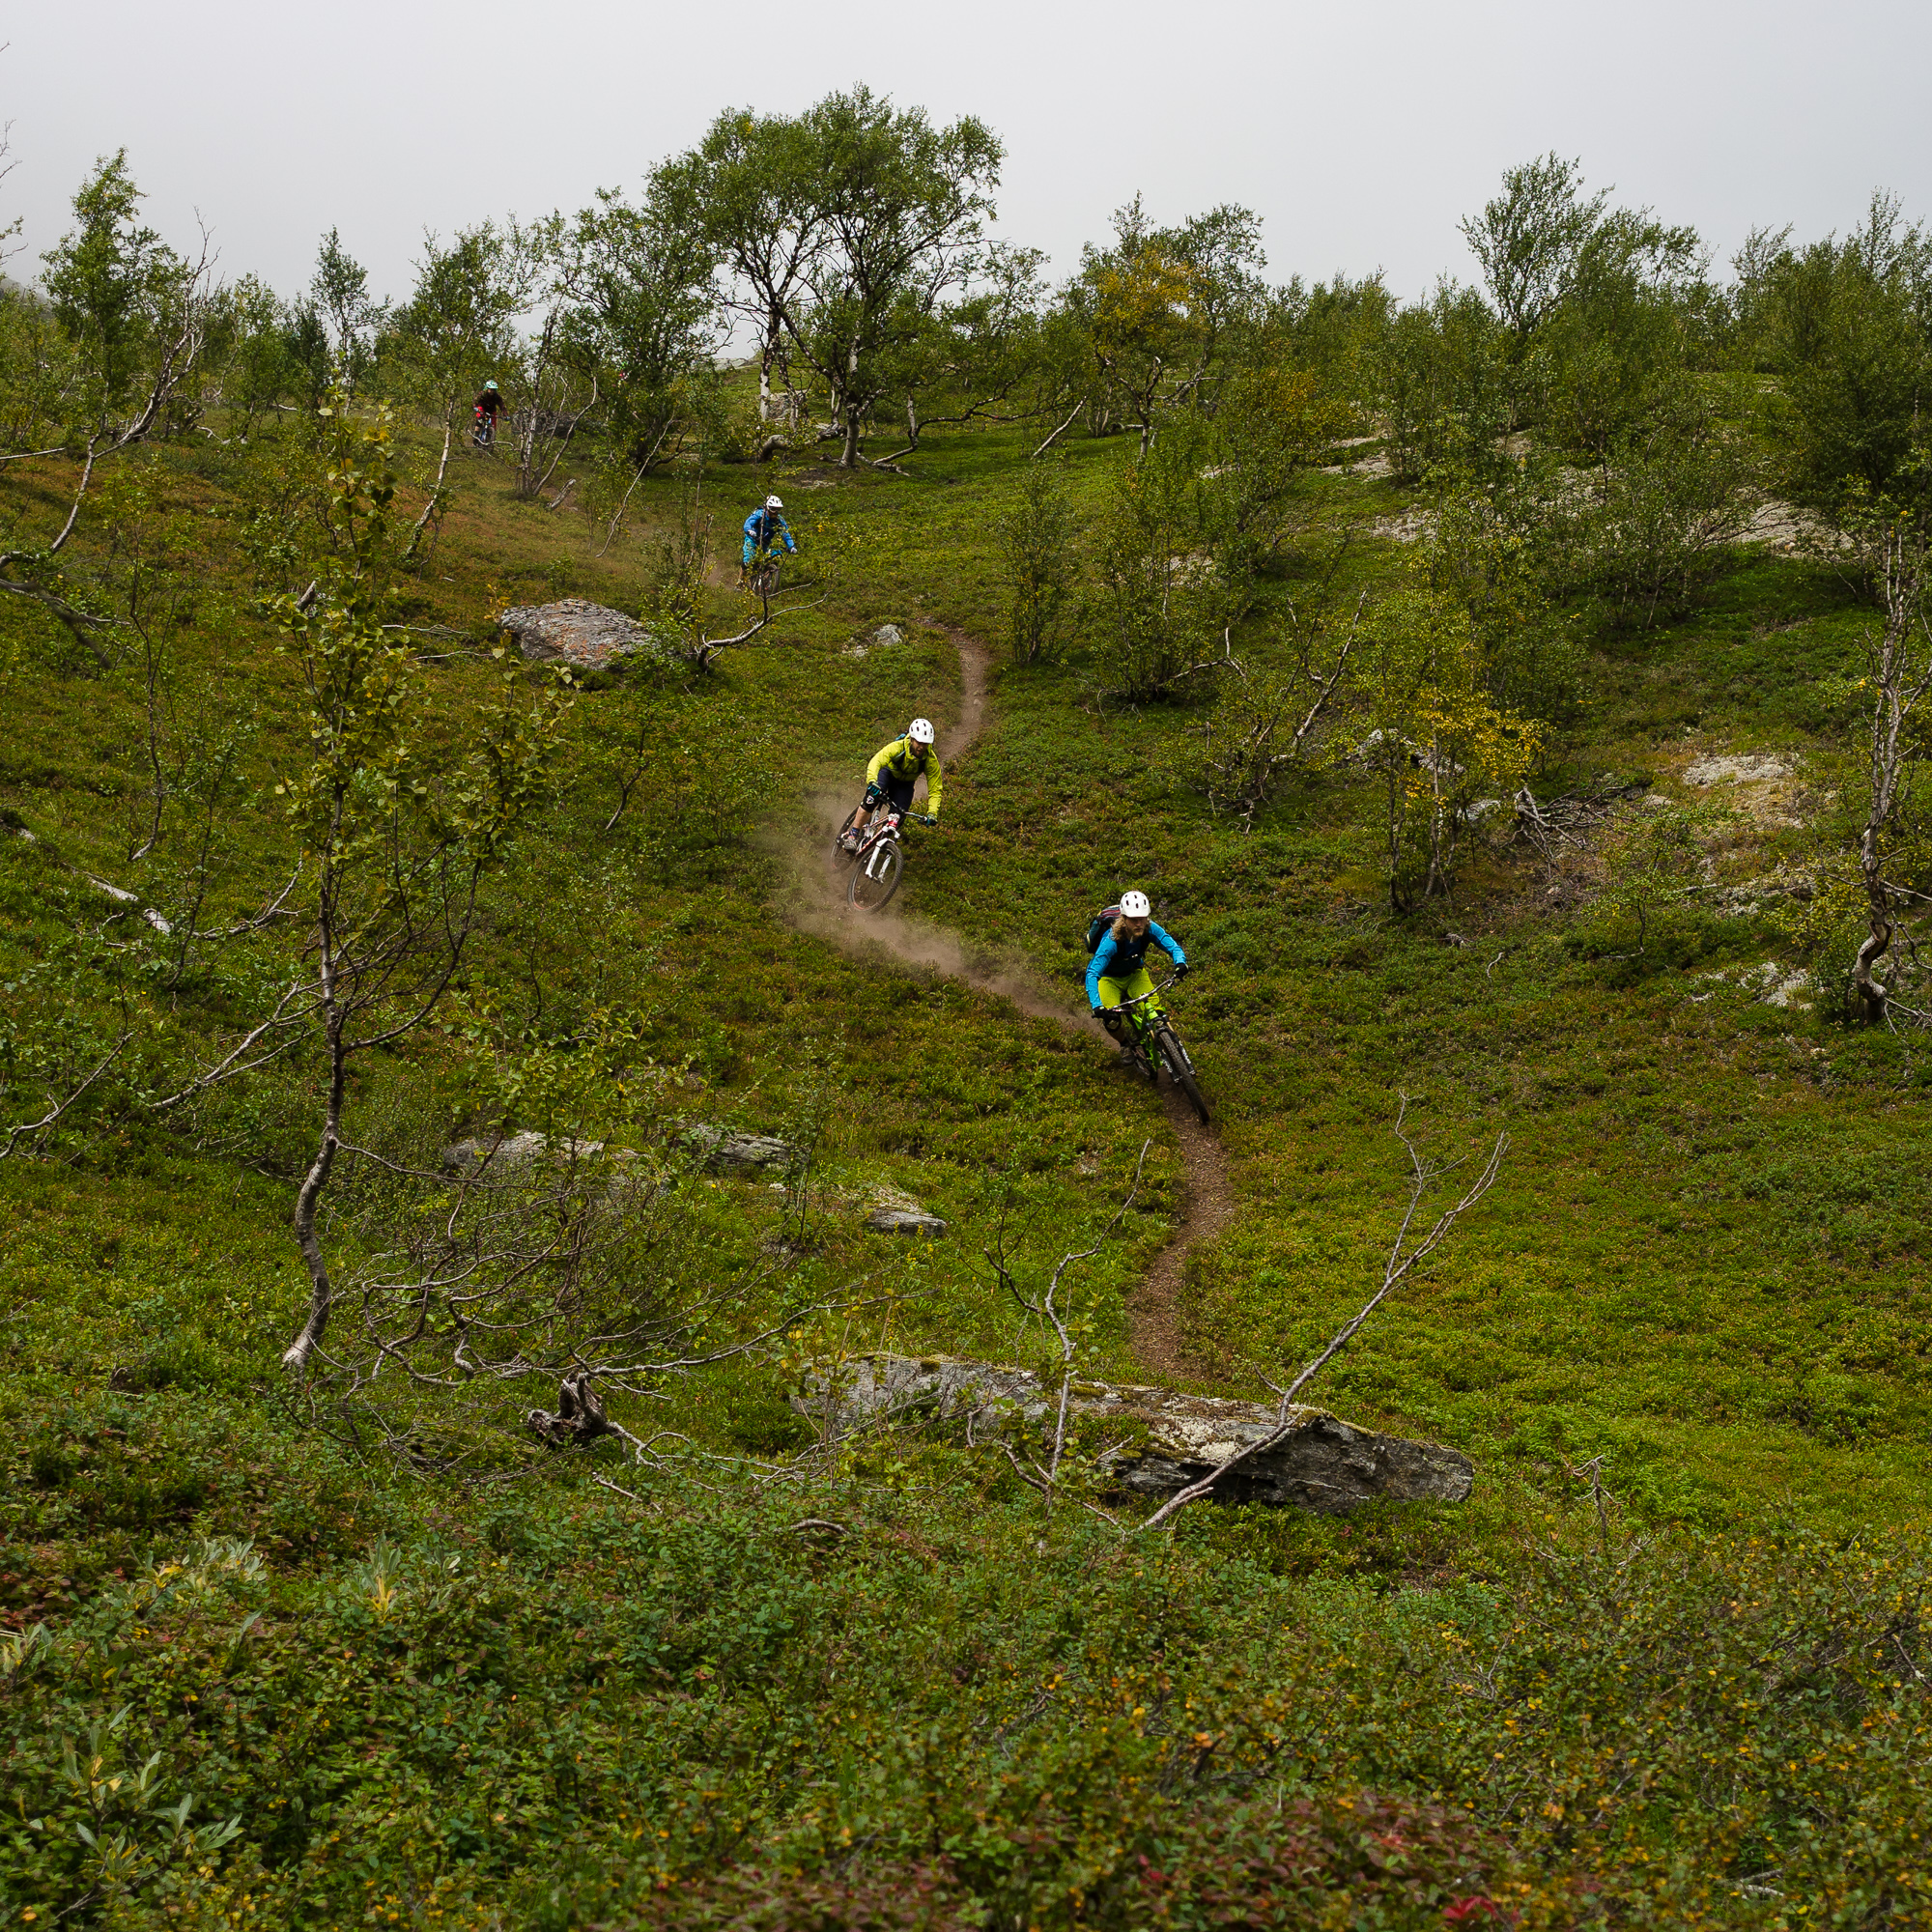 Gustav, Marius, Stian and Sanna get the train going in the dusty, loamy goodness.